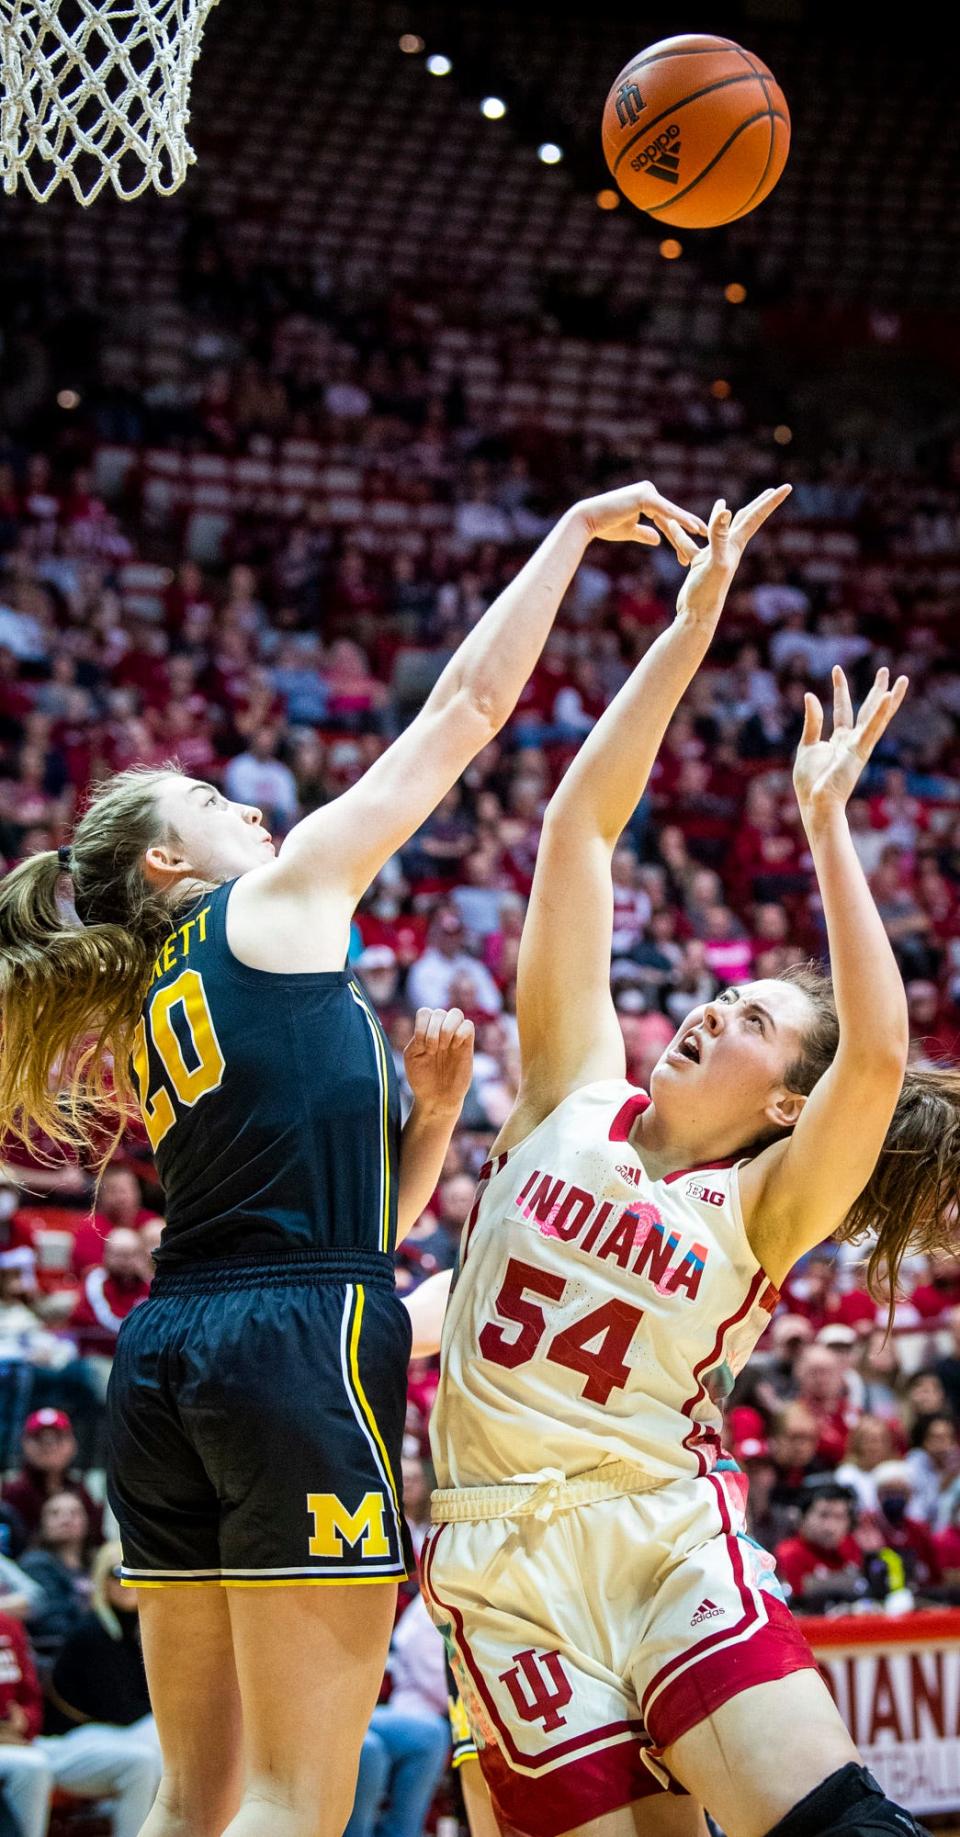 Indiana's Mackenzie Holmes (54) is blocked by Michigan's Alyssa Crockett (20) during the second half of the Indiana versus Michigan women's basketball game at Simon Skjodt Assembly Hall on Thursday, Feb. 16, 2023.